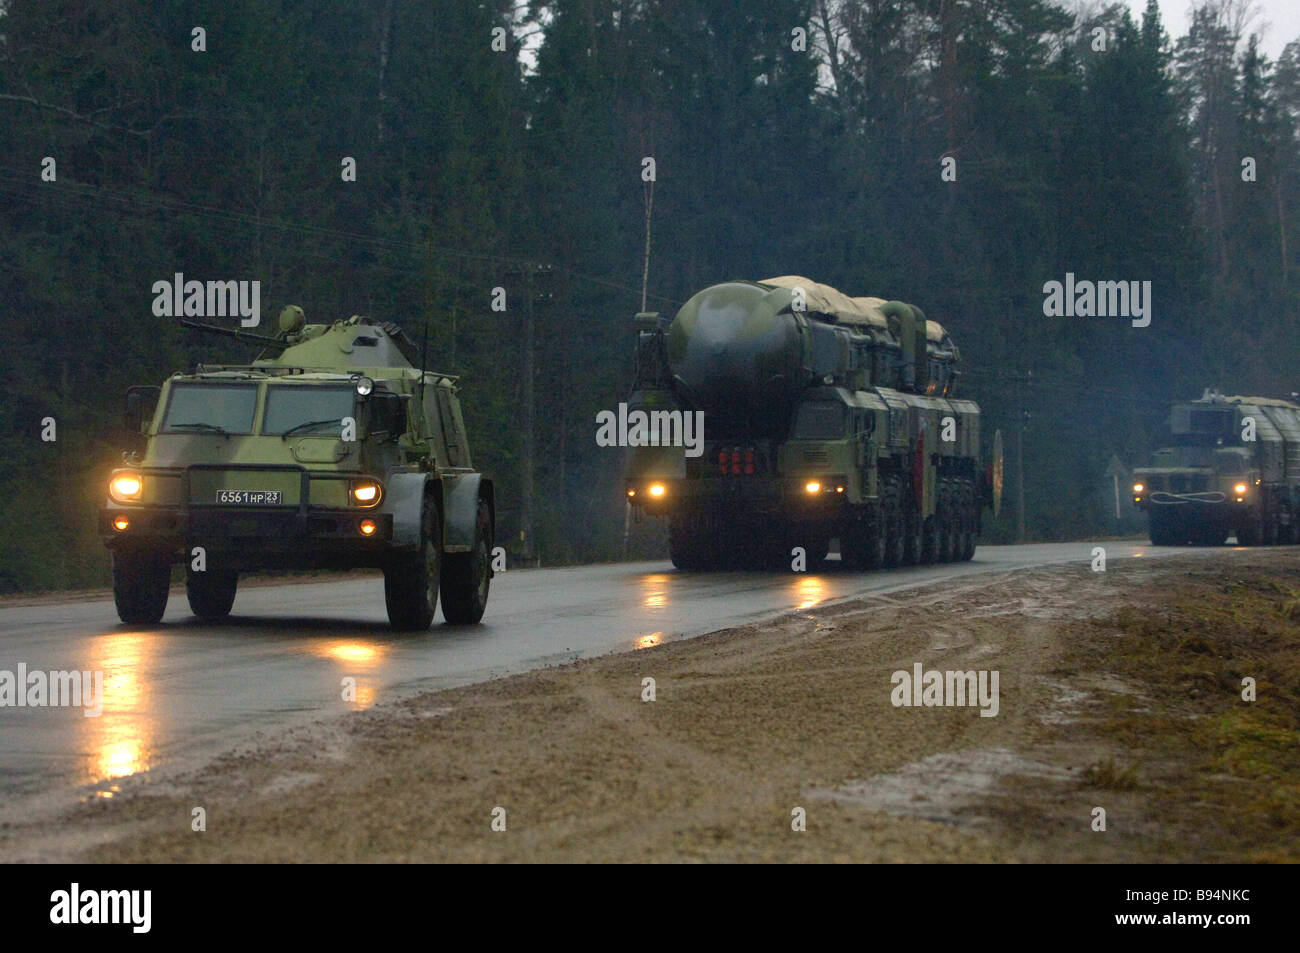 Land based mobile strategic missile system Topol getting into position Stock Photo